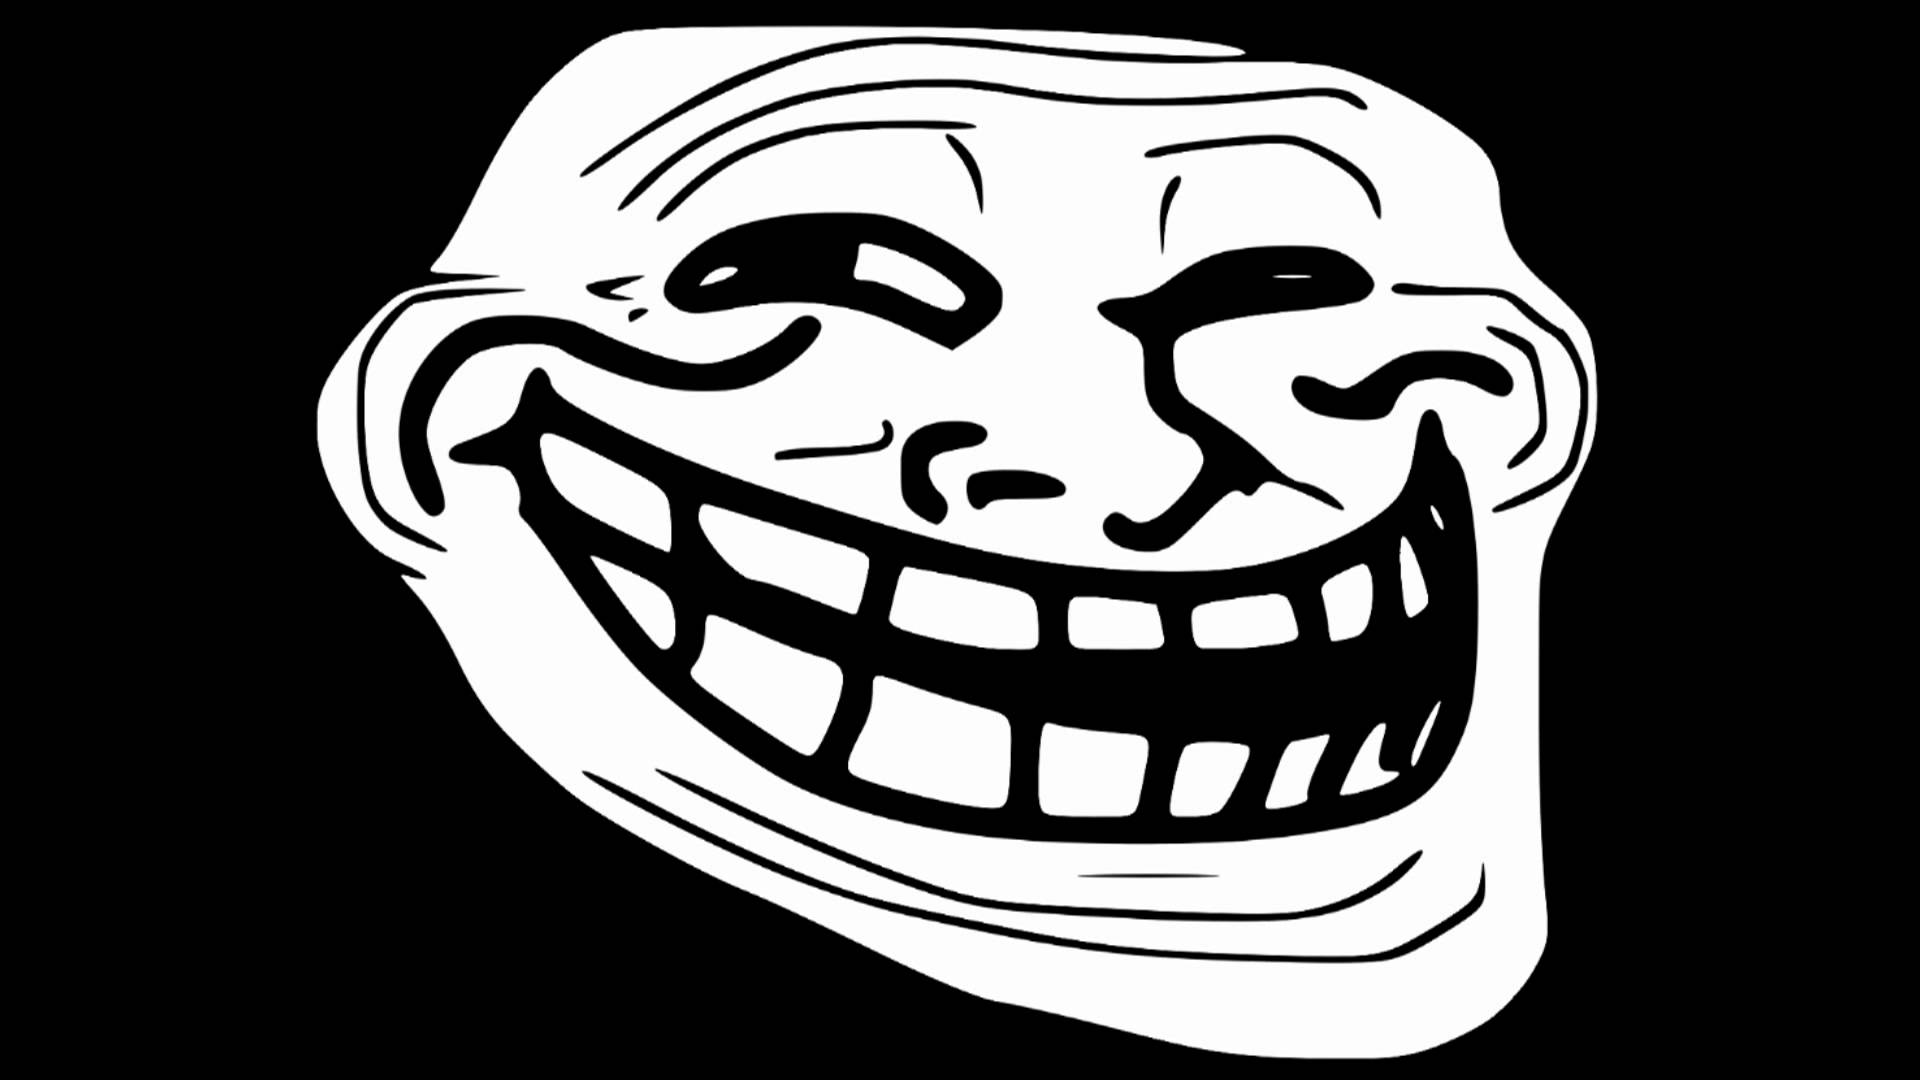 Download 50+ Troll face black background images for a humorous touch